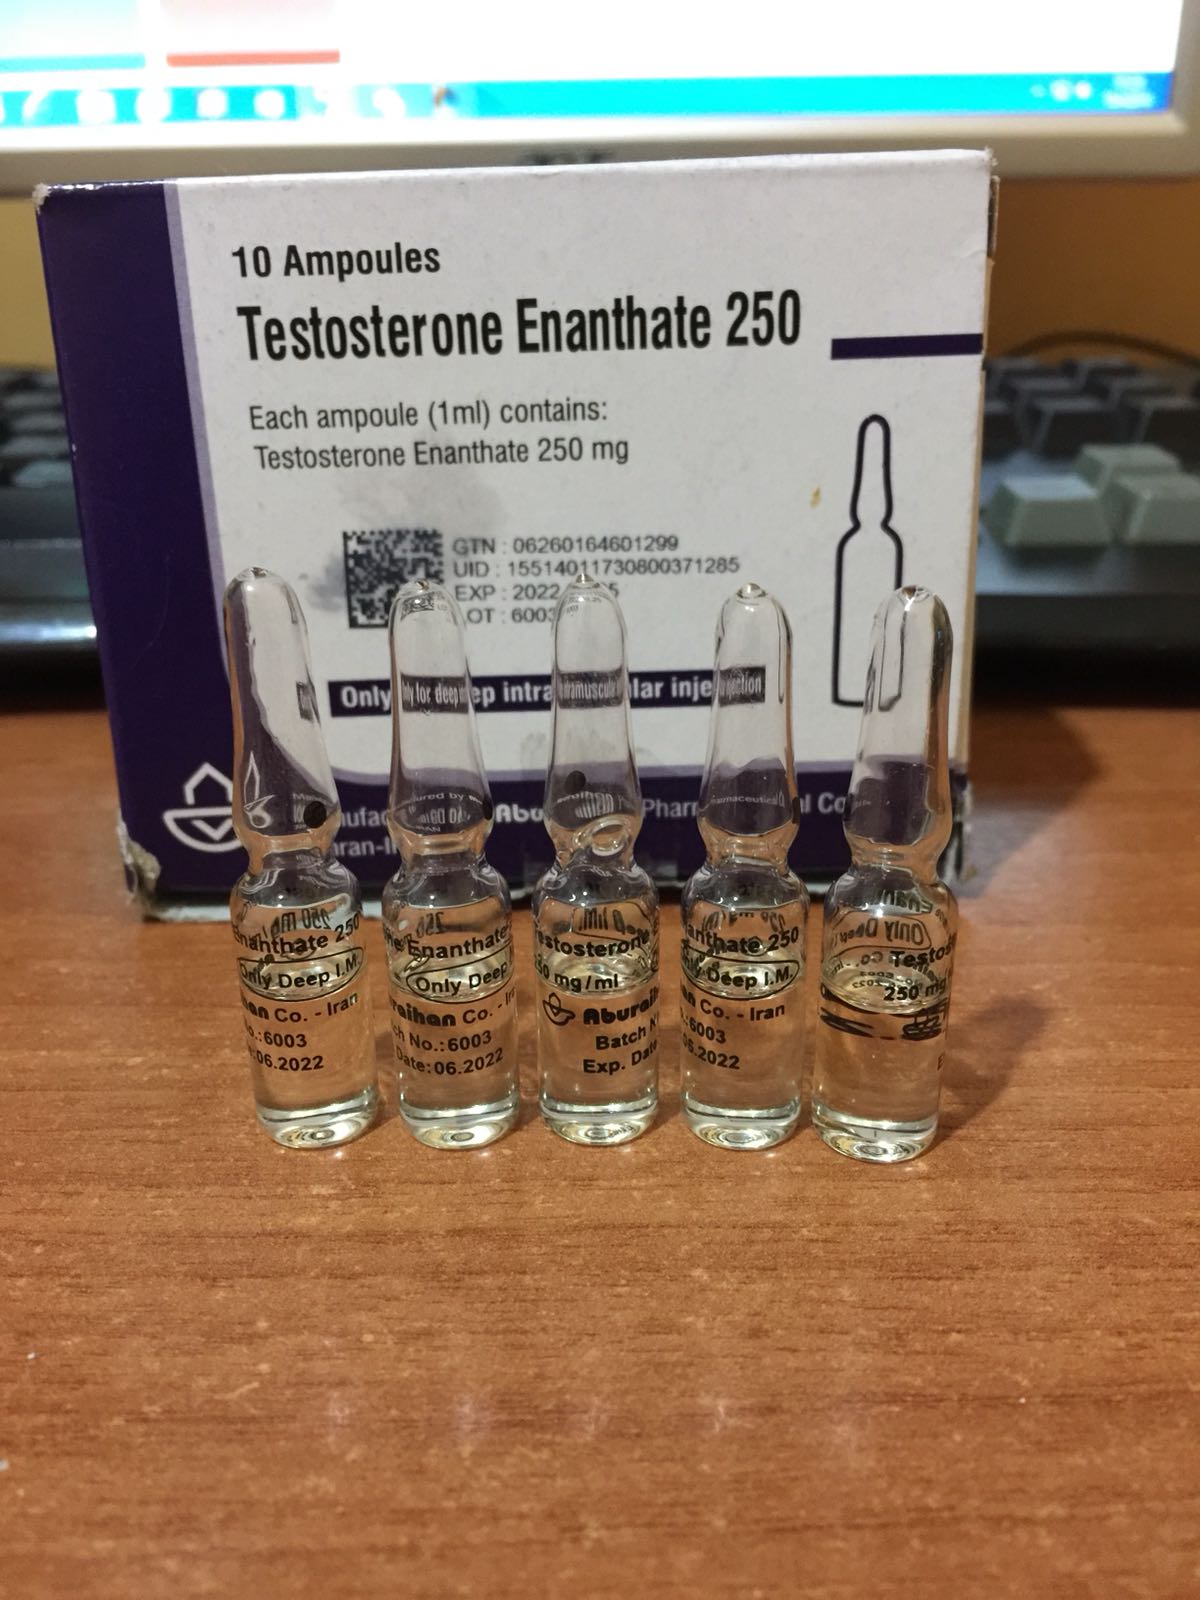 boldenone steroid Reviewed: What Can One Learn From Other's Mistakes